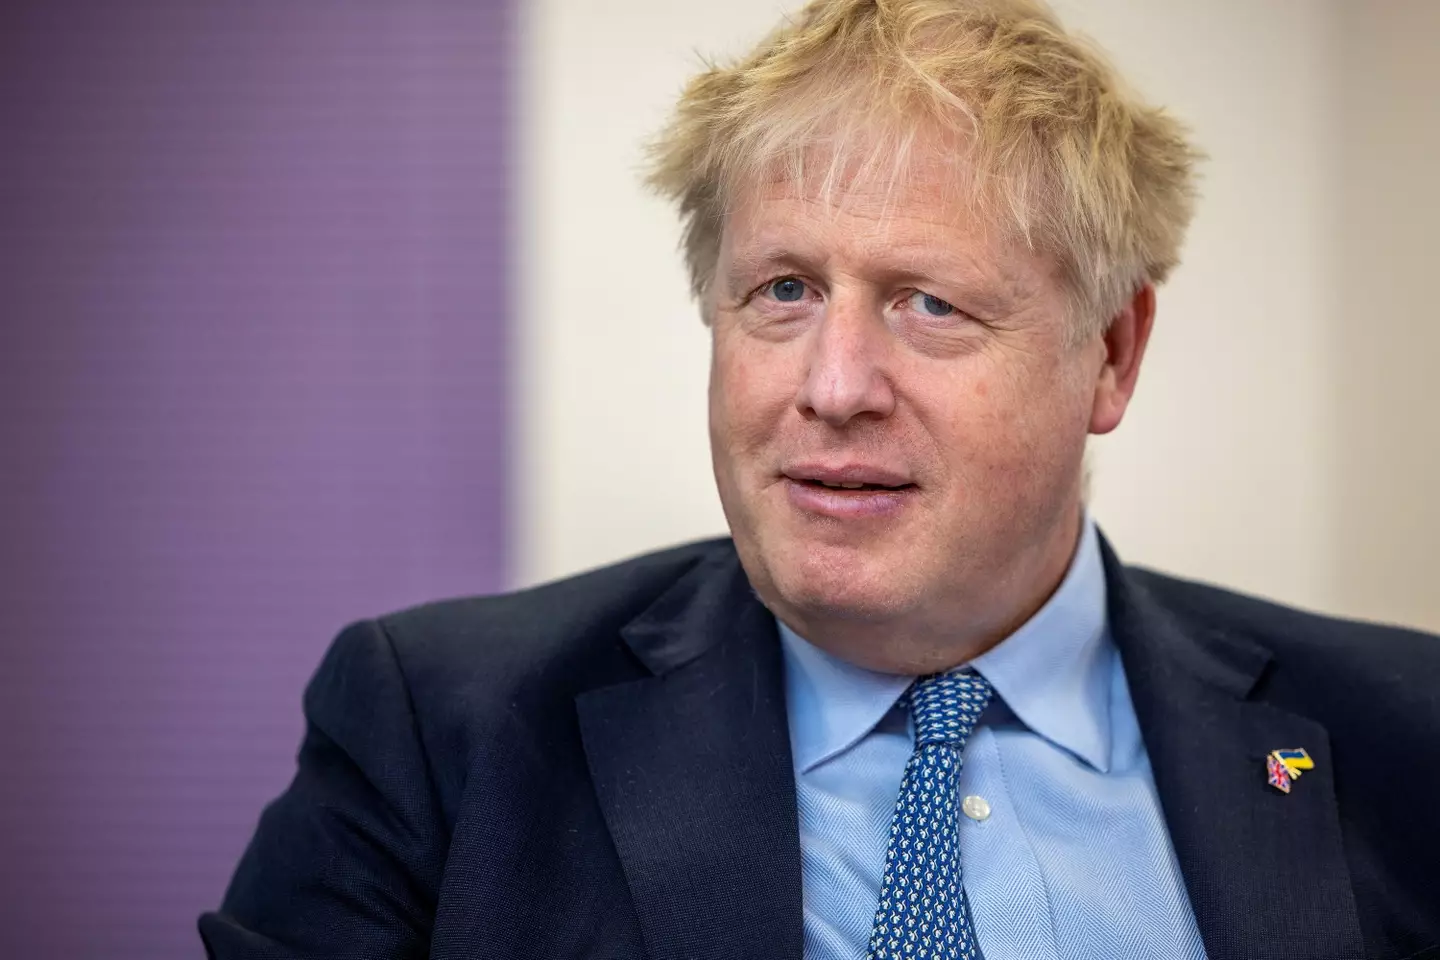 Boris Johnson was found to have broken rules during lockdown.